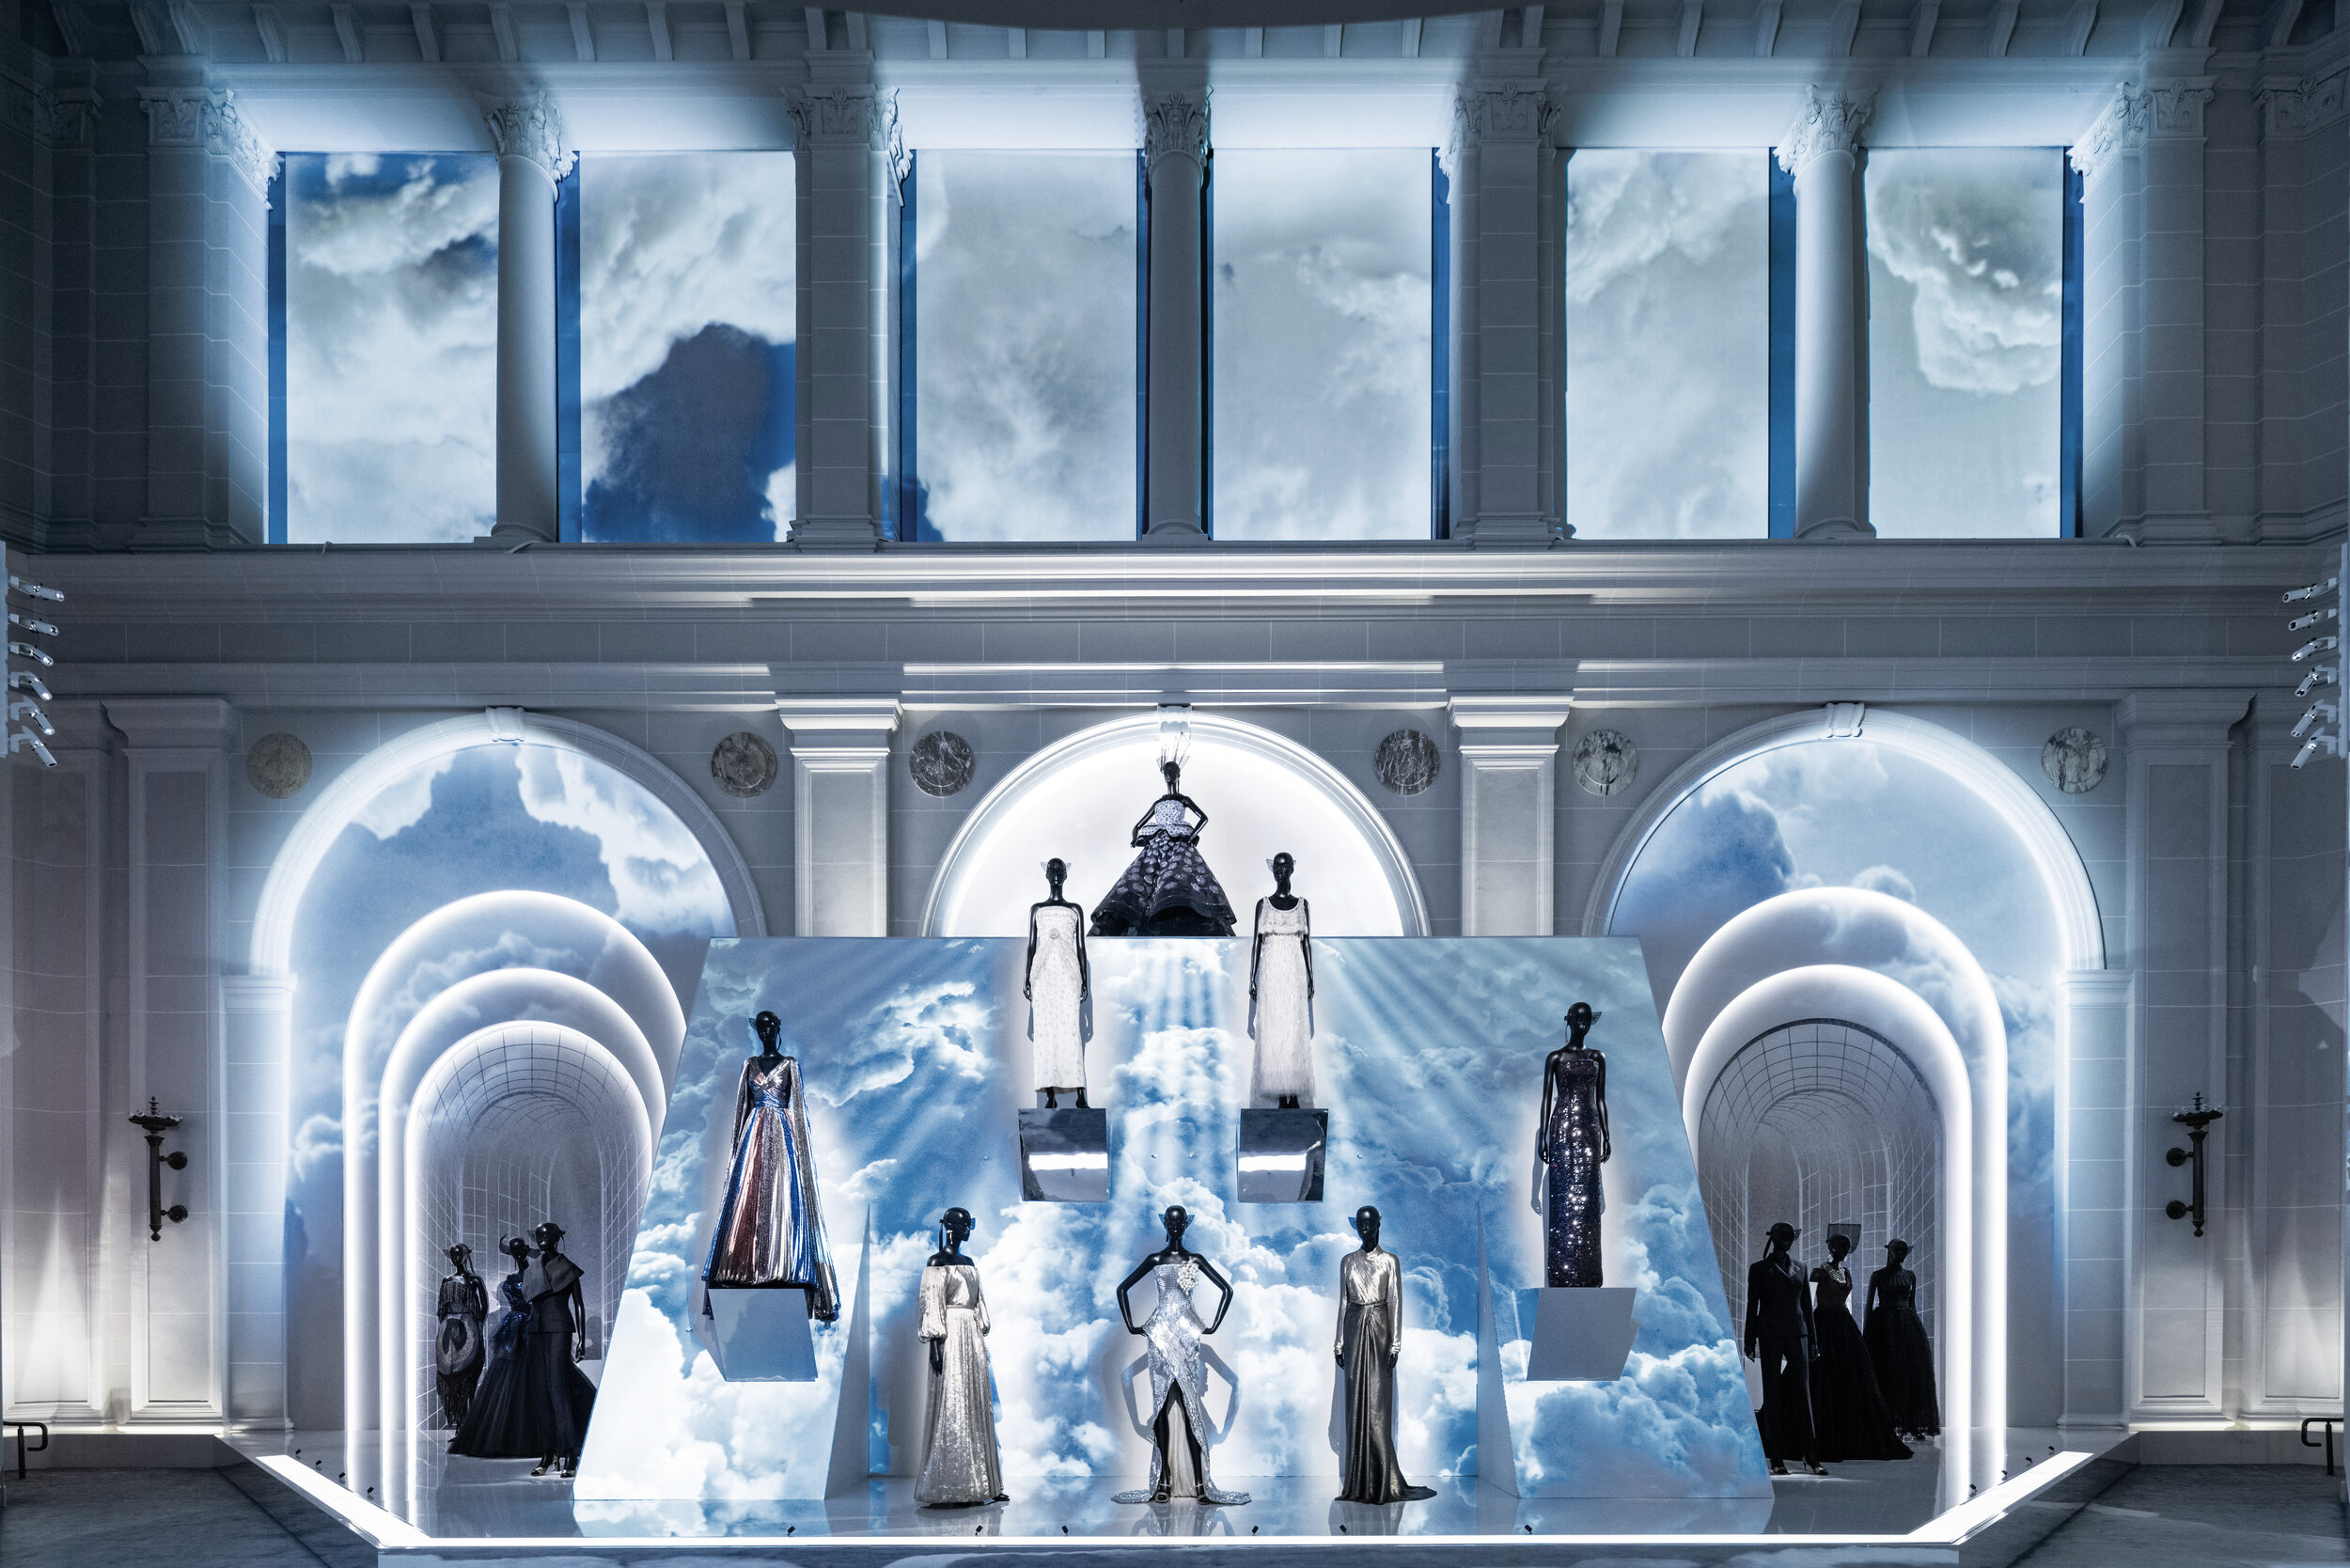 Fashion and Decor: First 10 Years for Christian Dior Fashion Show